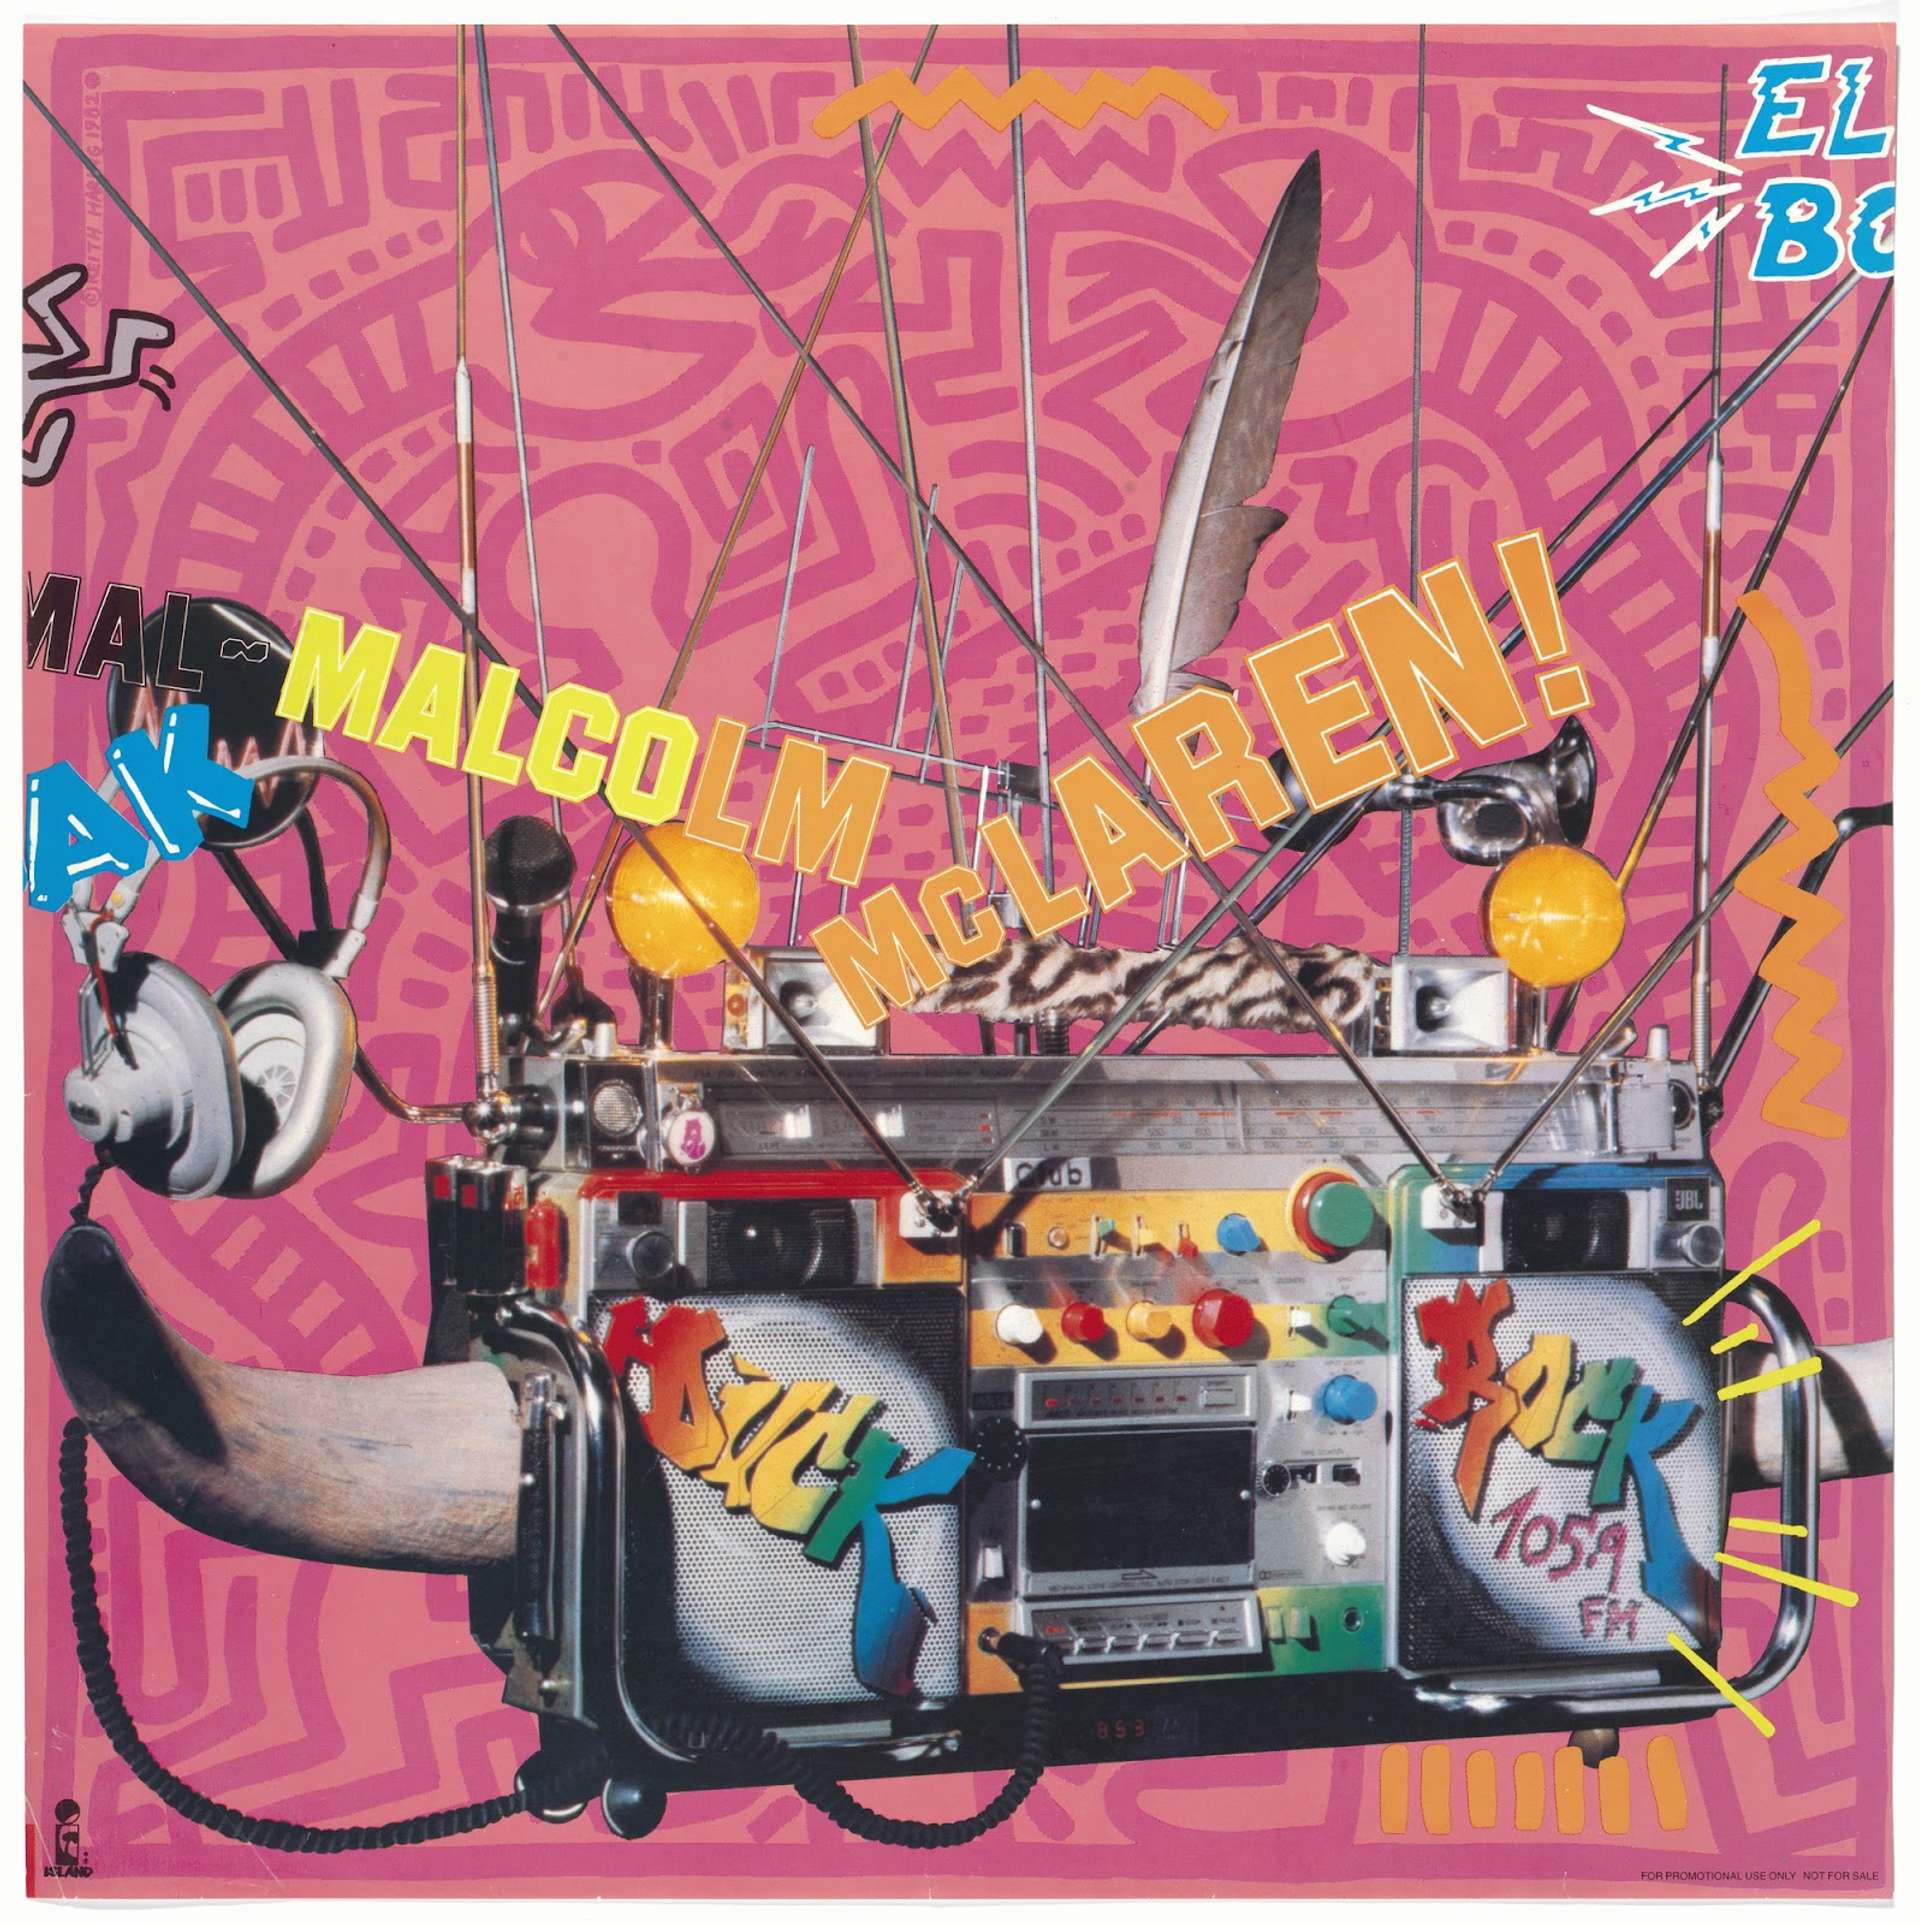 An image of the album cover for Duck Rock, by Malcolm McLaren. It shows a surrealist machine, composed of musical instruments and other assorted objects against a background drawing by artist Keith Haring.